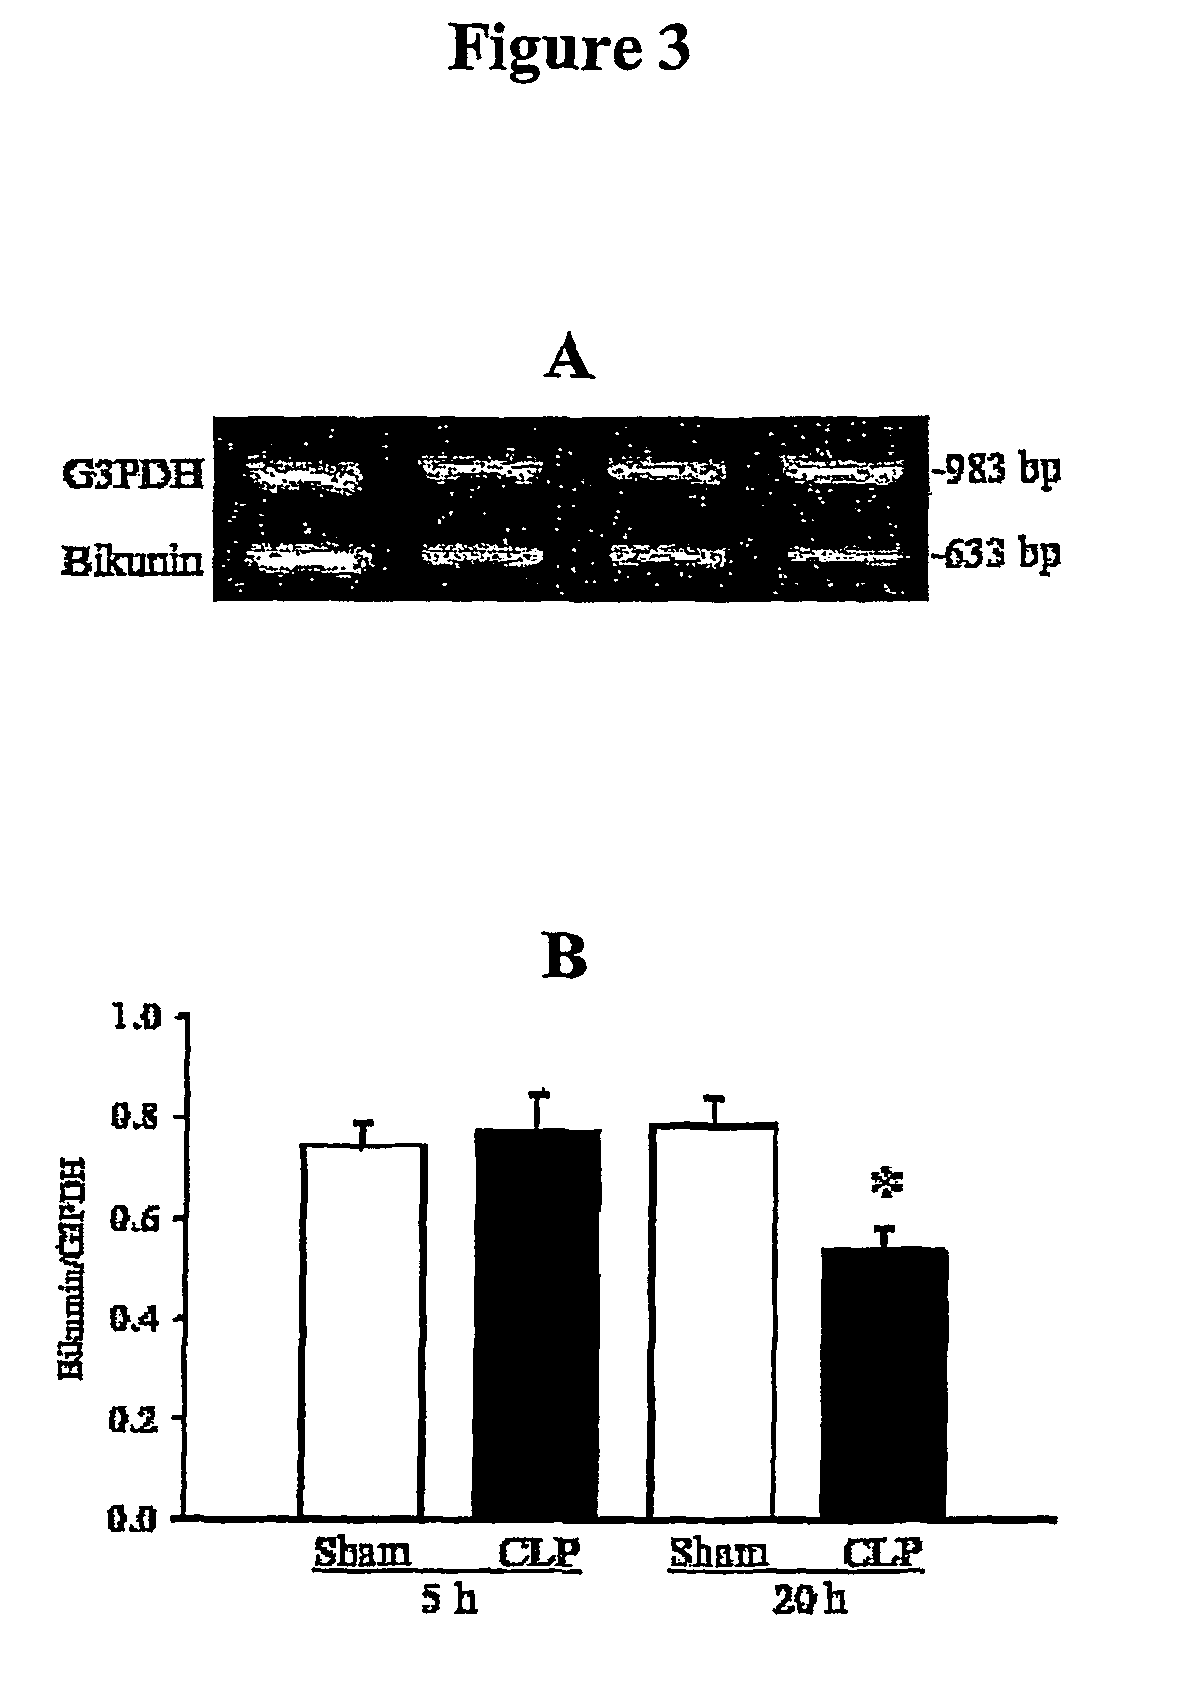 Preparation and composition of inter-alpha inhibitor proteins from human plasma for therapeutic use